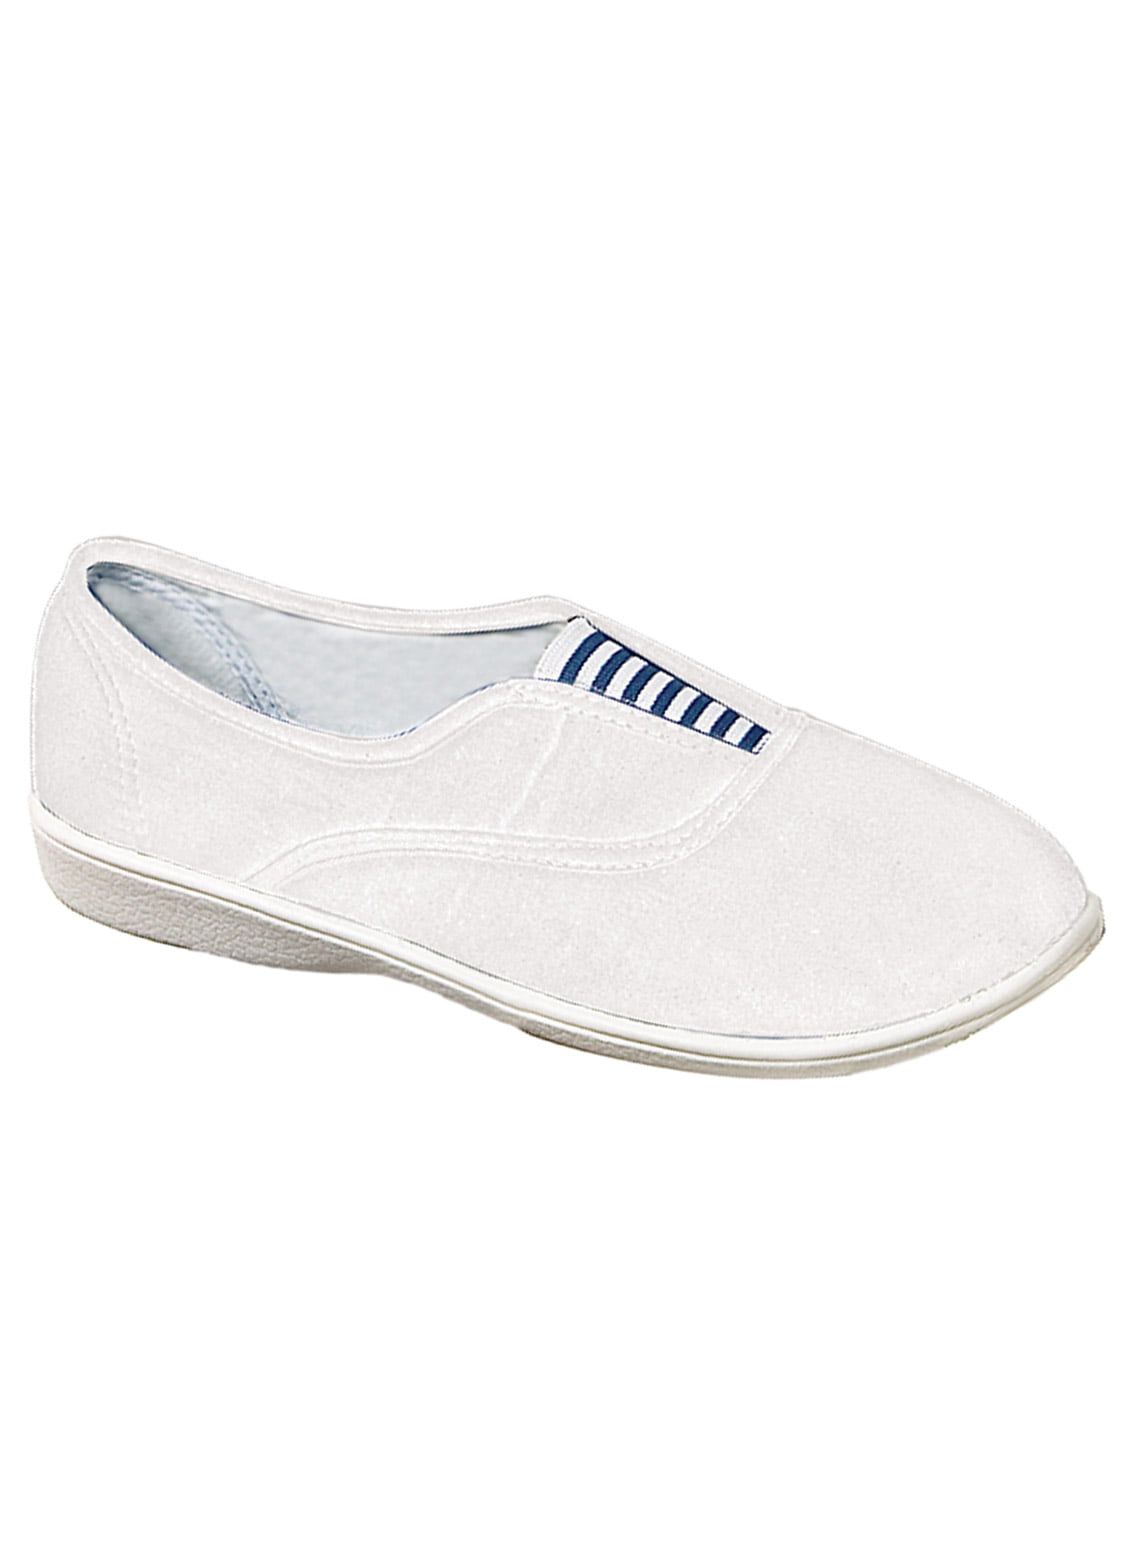 Carol Wright Gifts Perforated Flat Wide Size 8-1/2 White